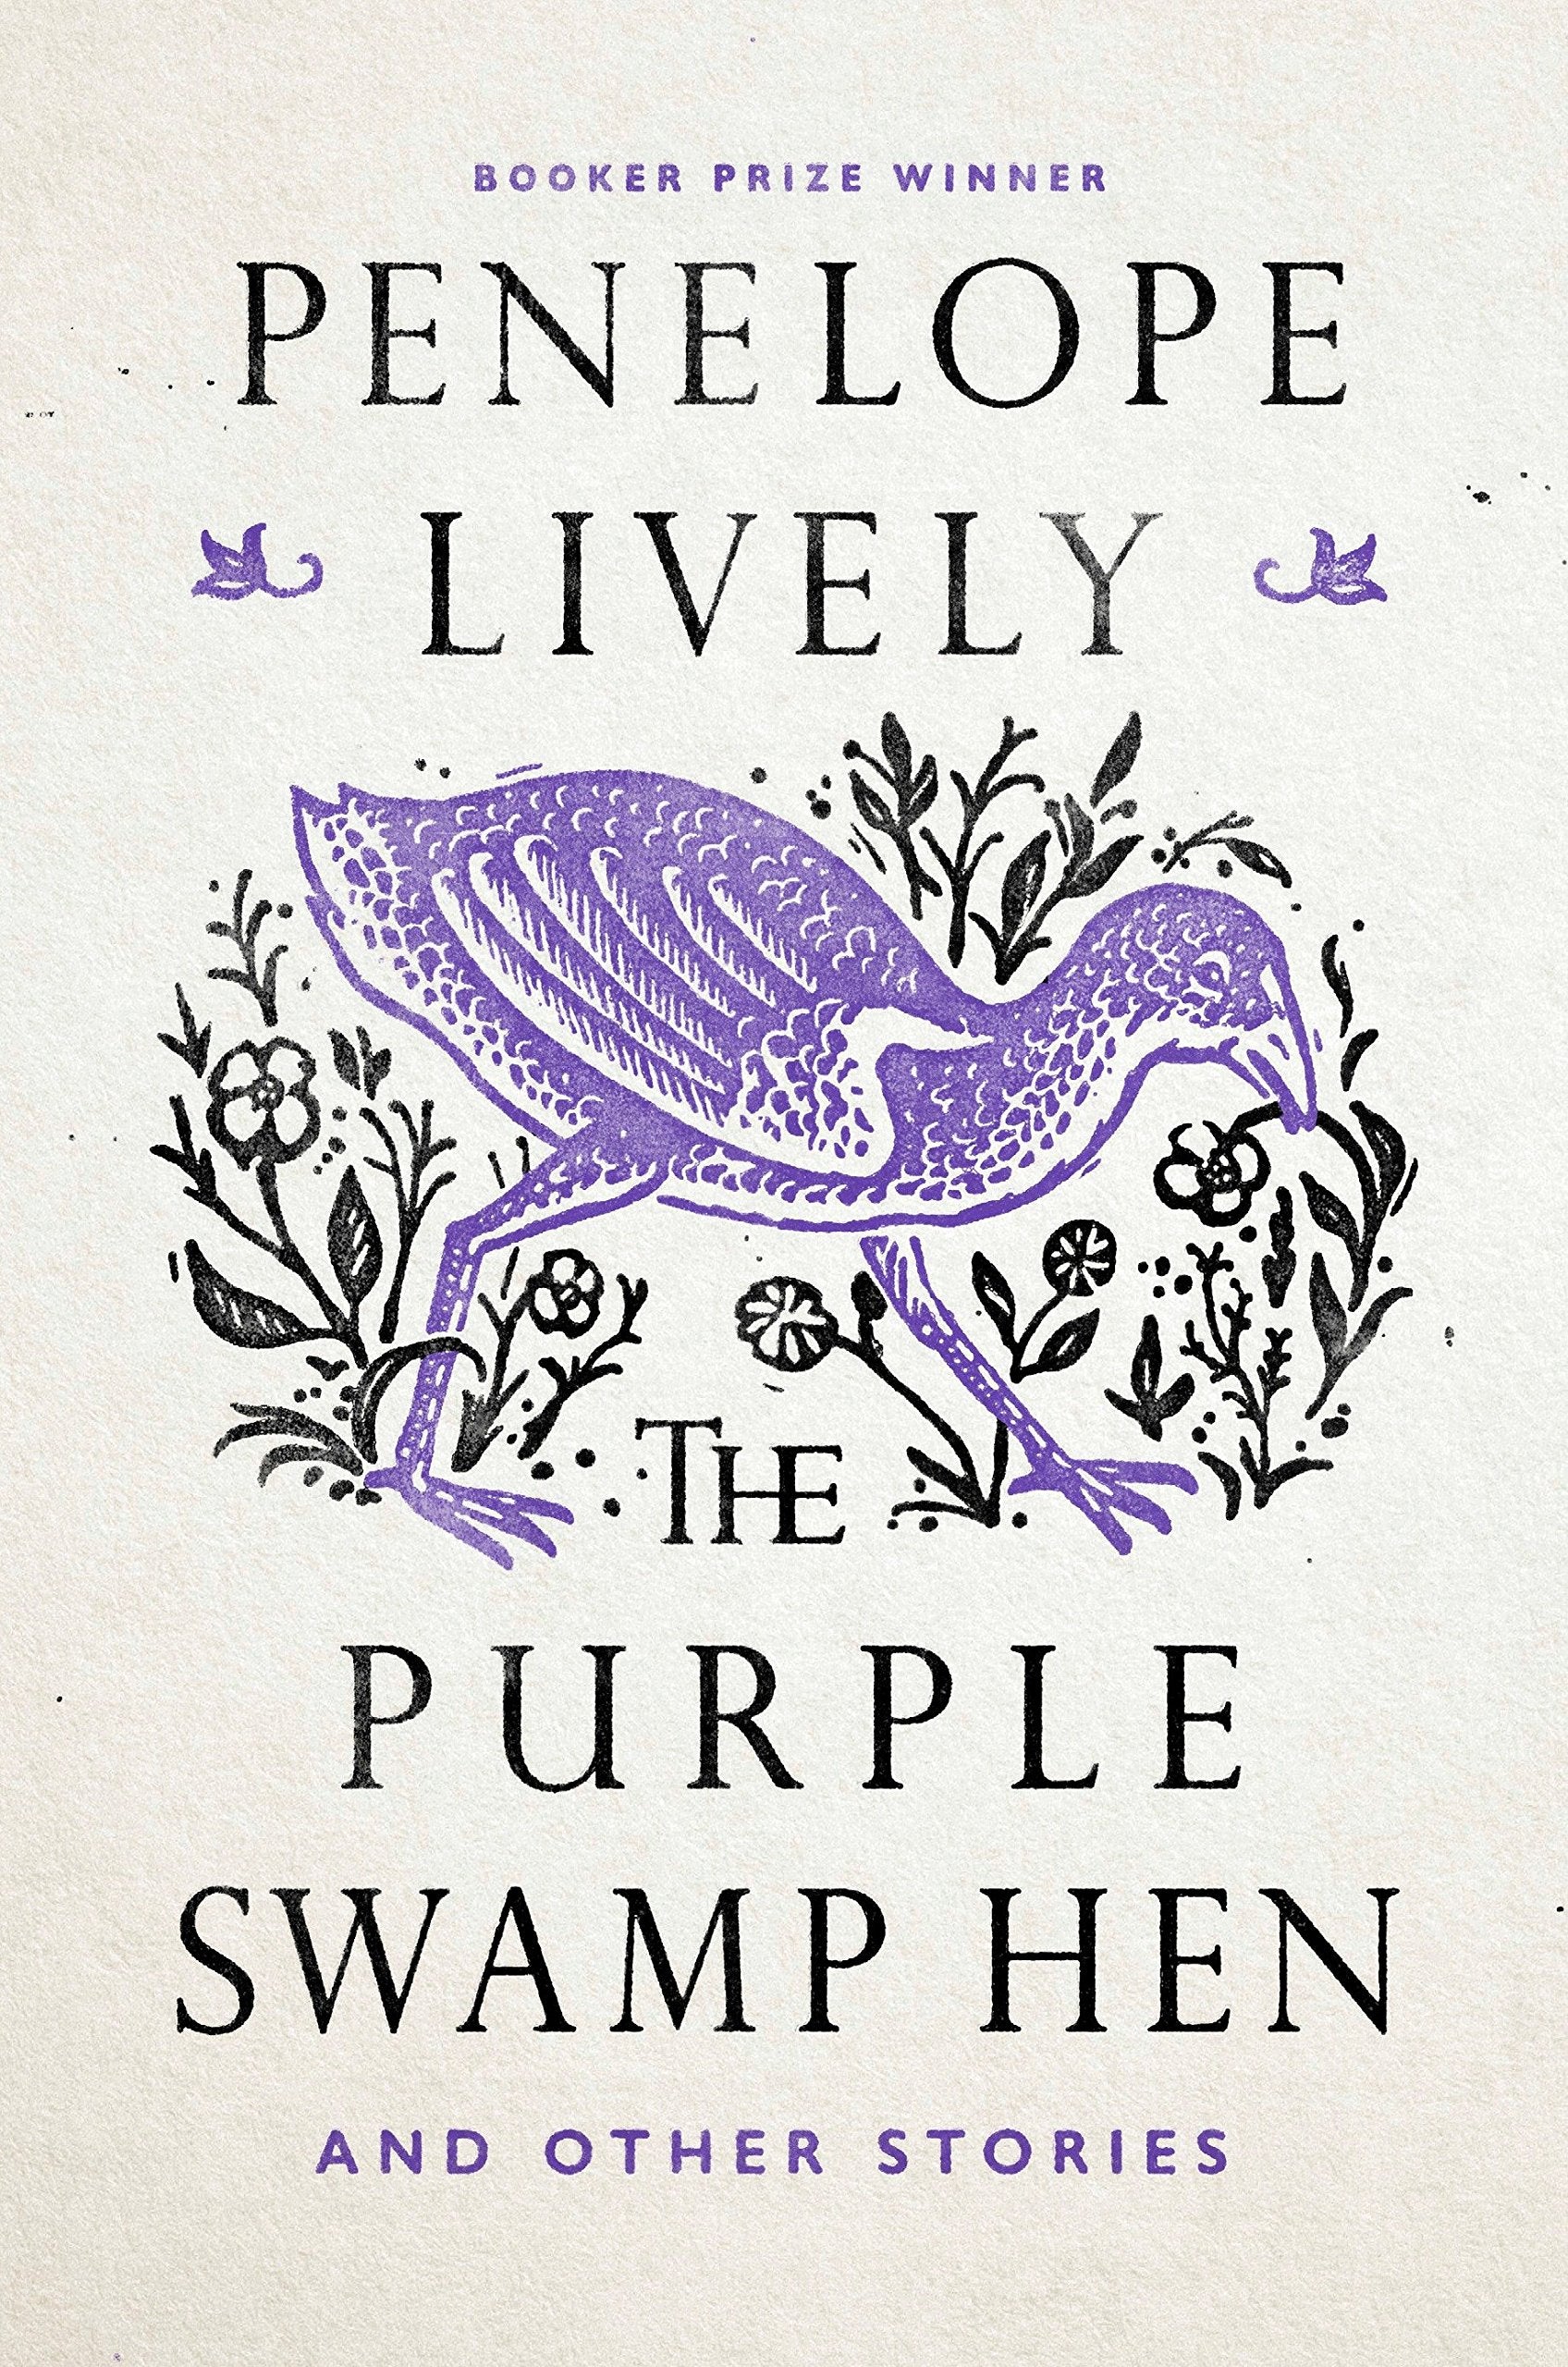 Stories　Other　The　Purple　and　Swamp　Hen　Books　of　by　–　Penelope　Purveyors　Pre-owned　Lively　Biblio: